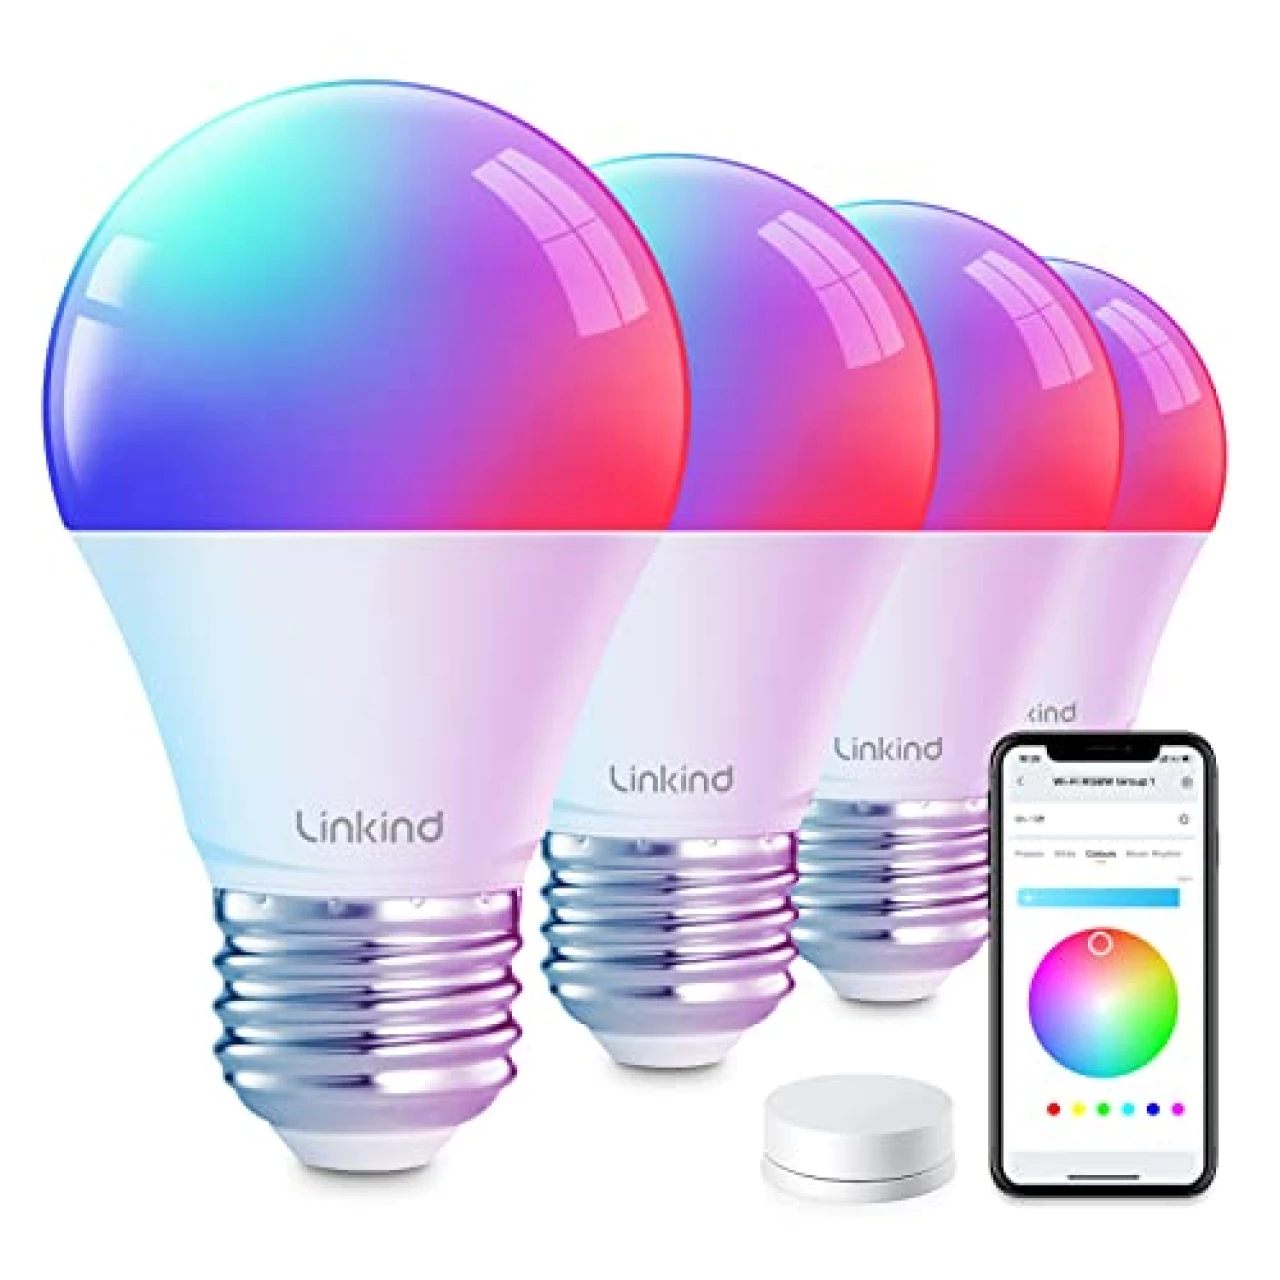 Linkind Smart Light Bulbs with Remote Control, Smart Bulb That Work with Alexa &amp; Google Home, 16 Million Color Changing Light Bulbs 60W, A19 E26 2.4Ghz WiFi Light Dimmable,1800K-6500K,800lm 4 Pack